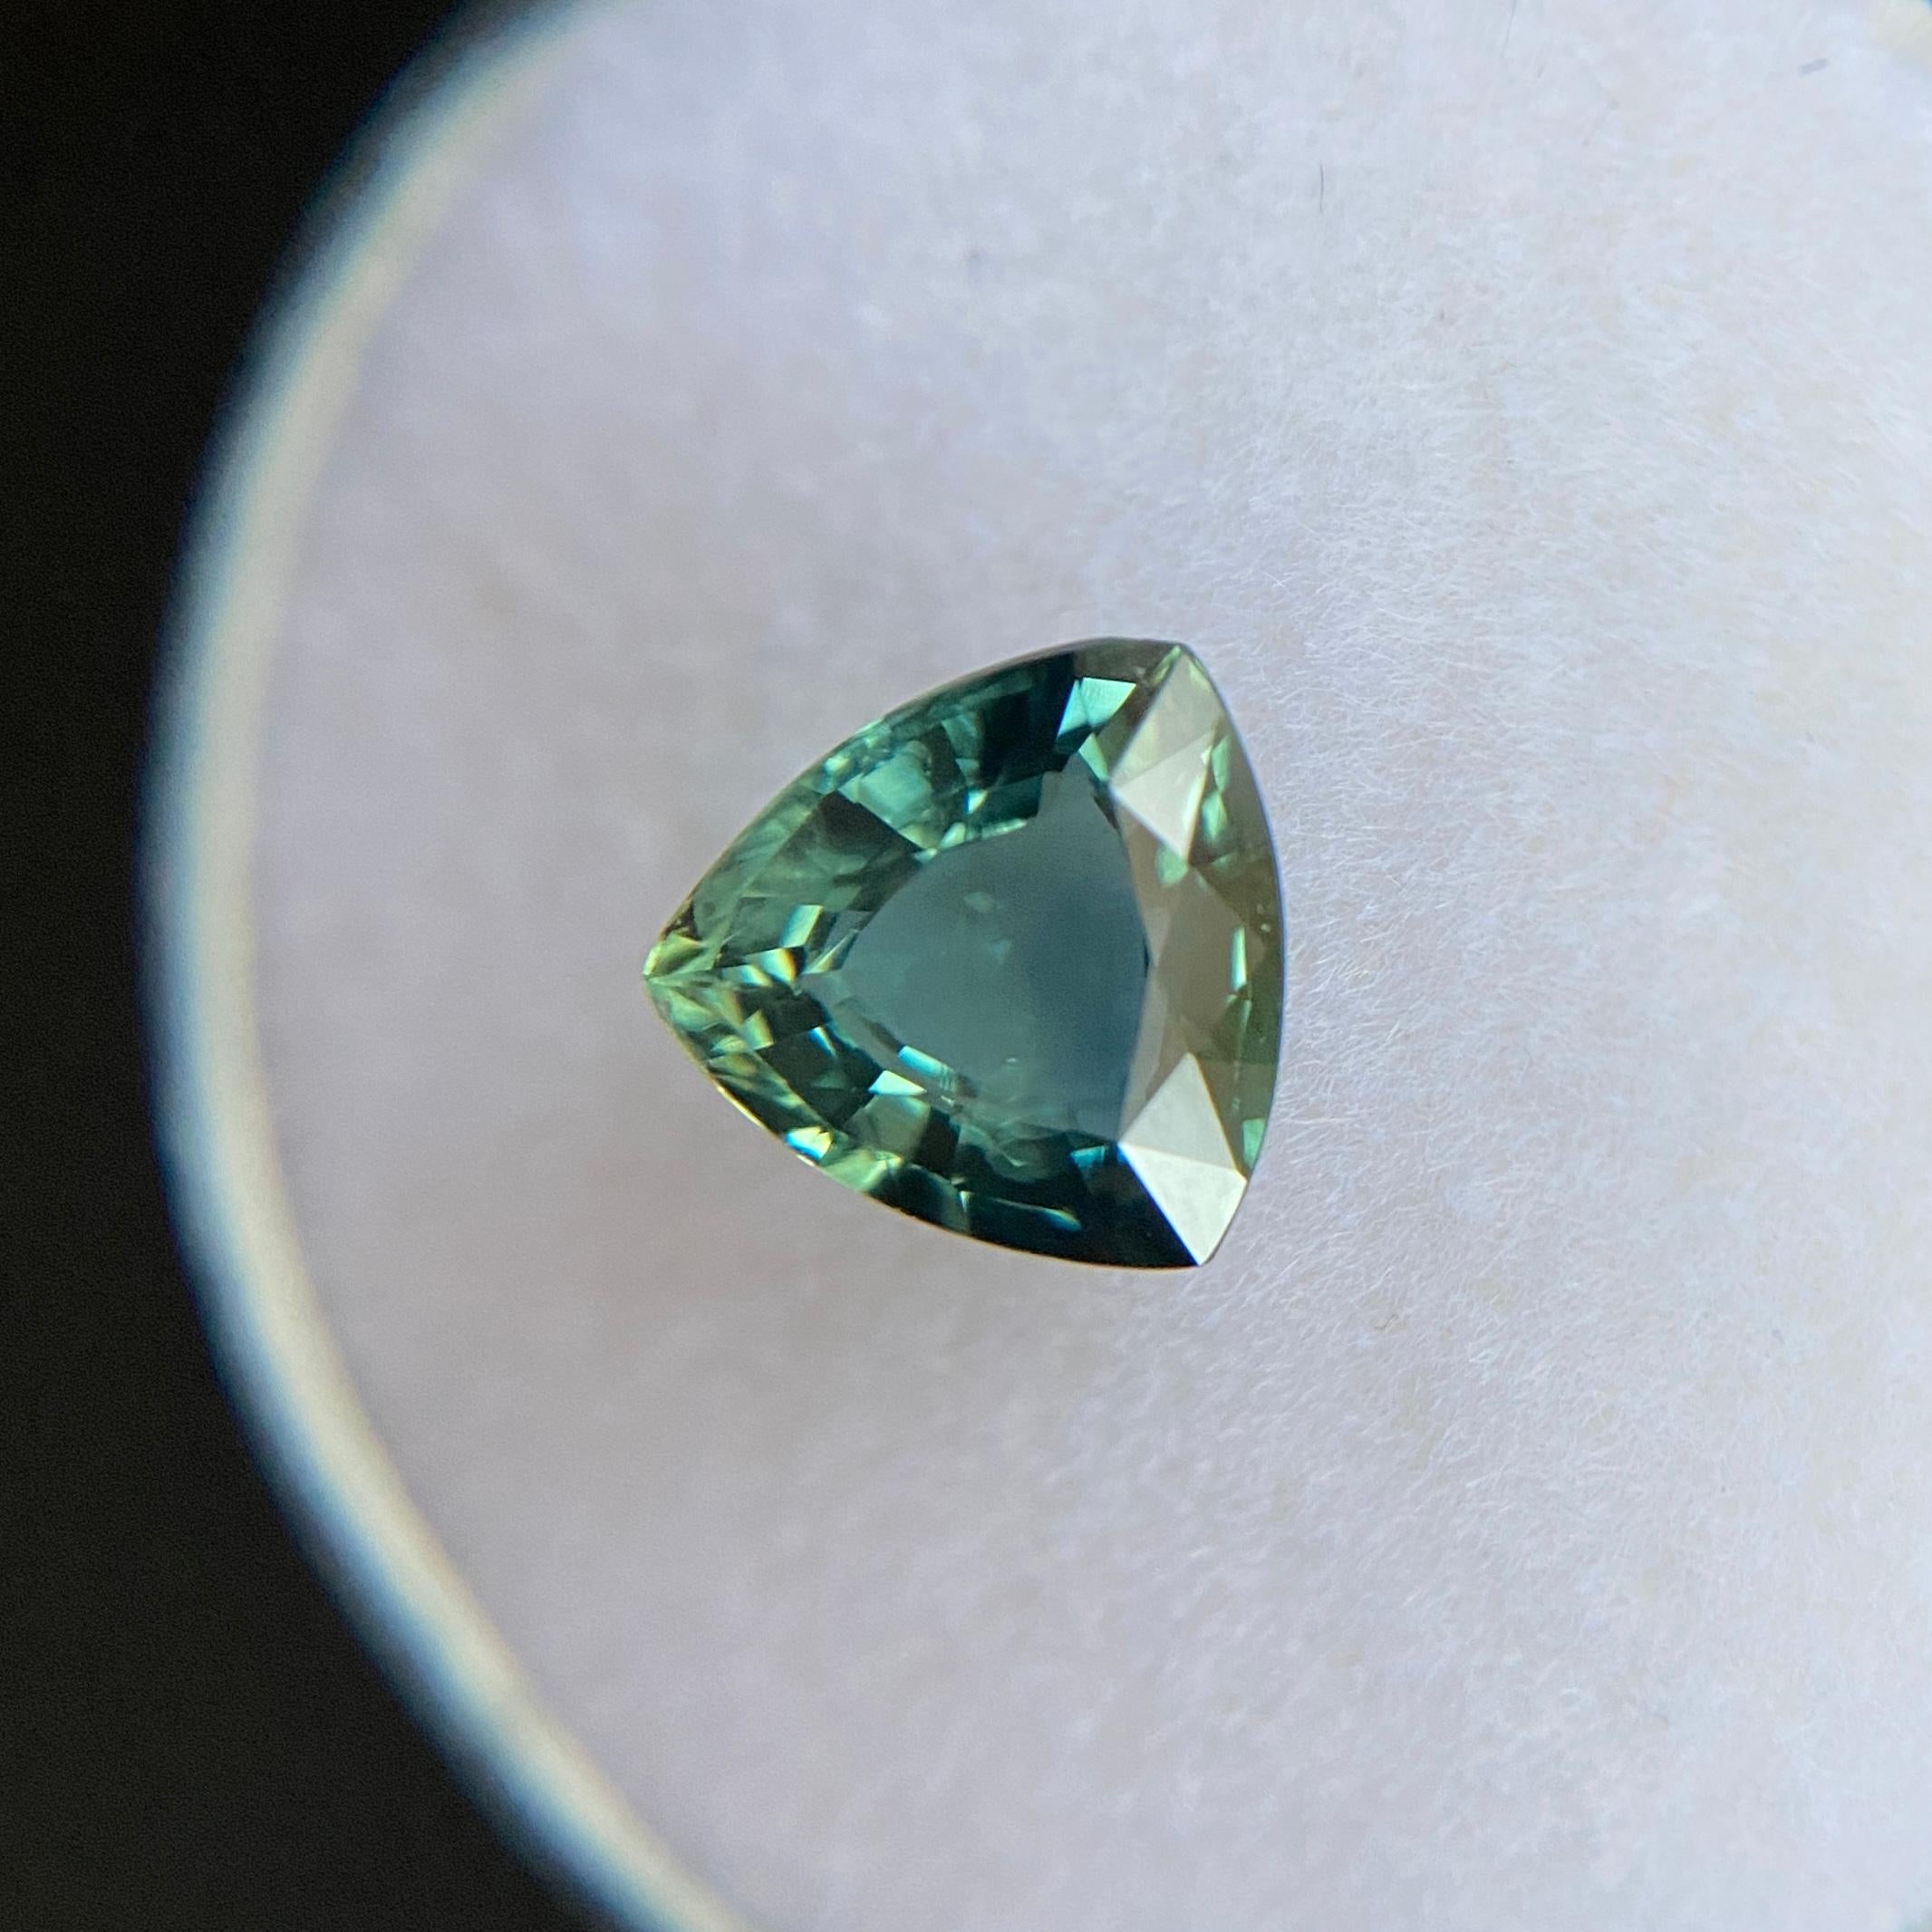 Natural Deep Green Blue Australian Sapphire Gemstone.

1.45 Carat with a beautiful greenish blue colour and very good clarity, a very clean stone.

Also has an excellent cut and polish to show great shine and colour, would look lovely in jewellery.